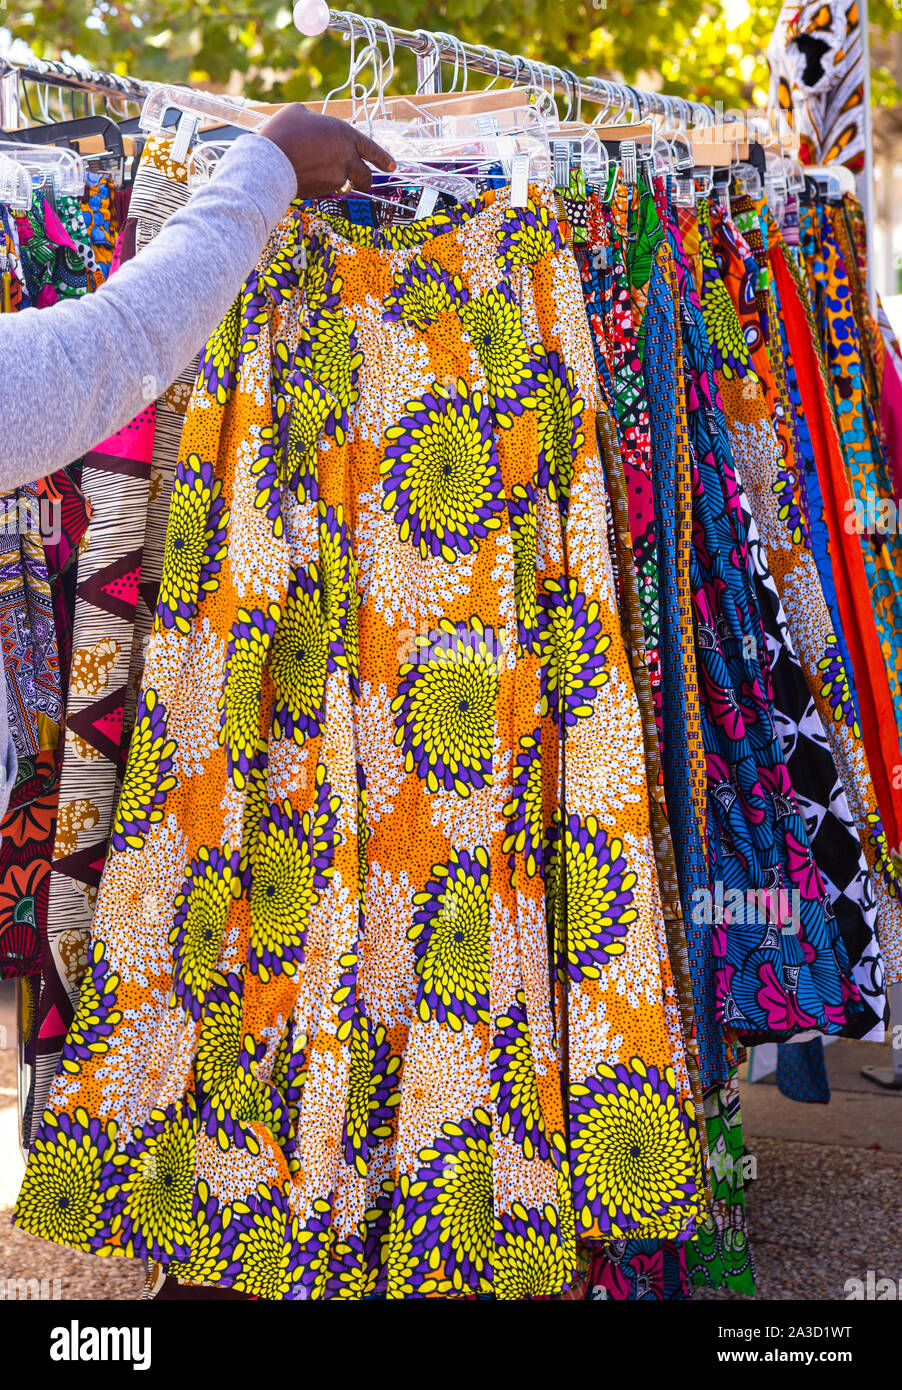 Beautiful West African clothing items for sale at an outdoor market ...